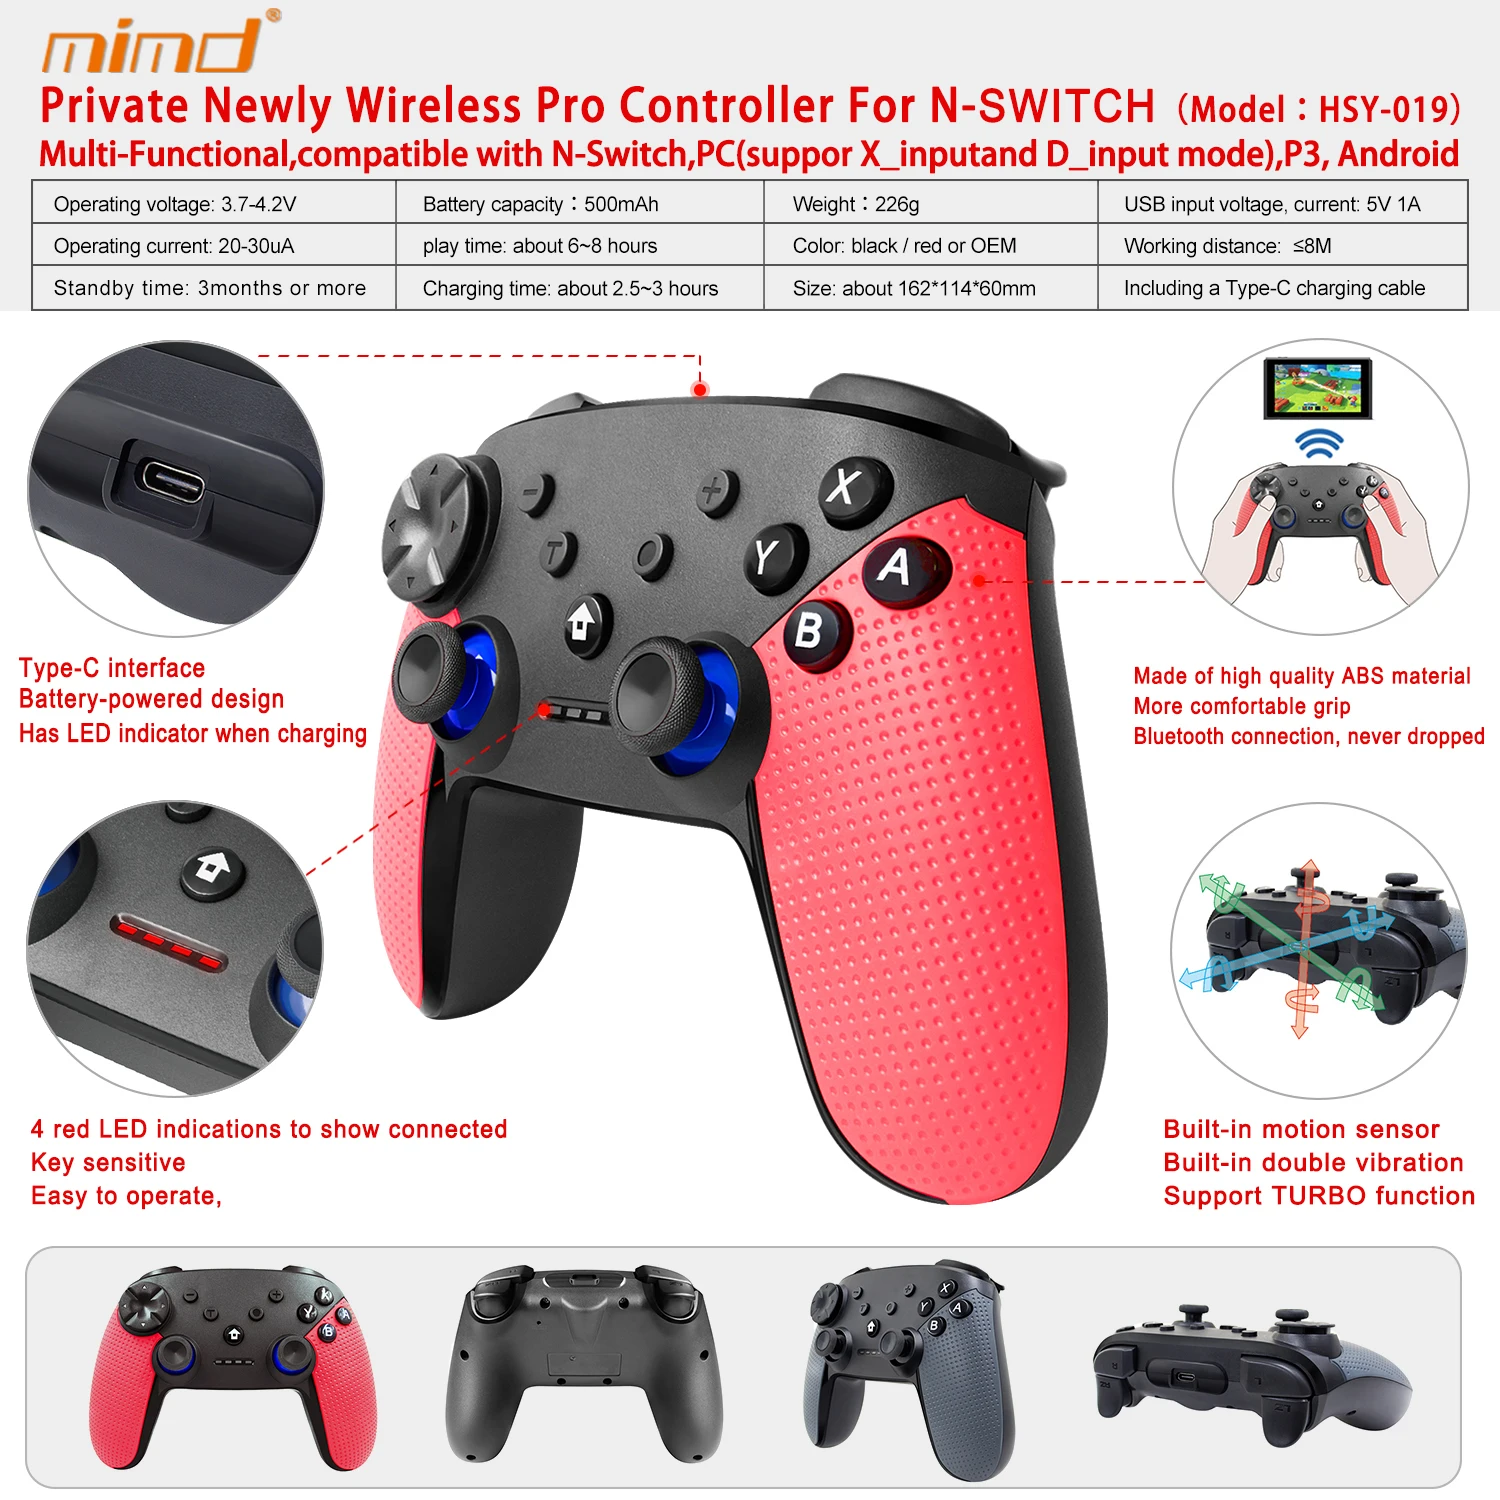 Hot New Blue Tooth Wireless Gamepad Controller Compatible With Nintendo Switch P3 Windows Pc And Android Buy Blue Tooth Wireless Gamepad For Nintendo Switch Blue Tooth Wireless Gamepad Controller Compatible With Nintendo Switch Wireless Controller